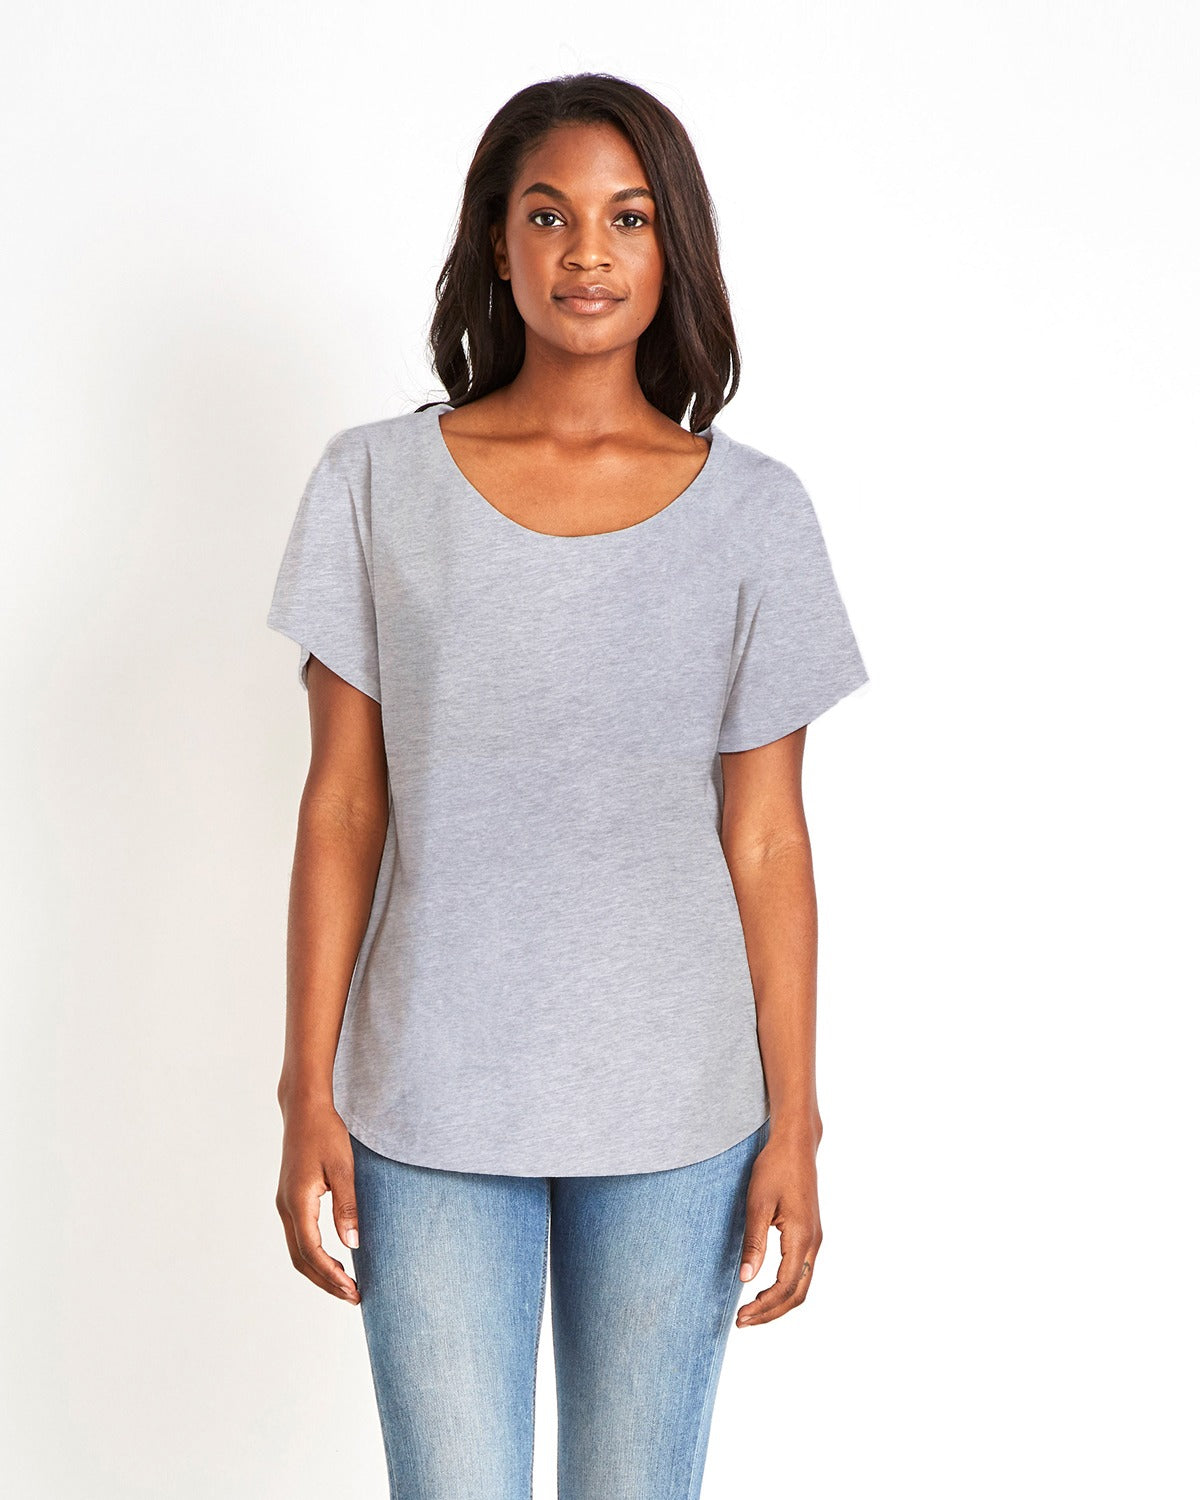 KritterXD Ladies' Dolman Relaxed Fit T-Shirt 1560